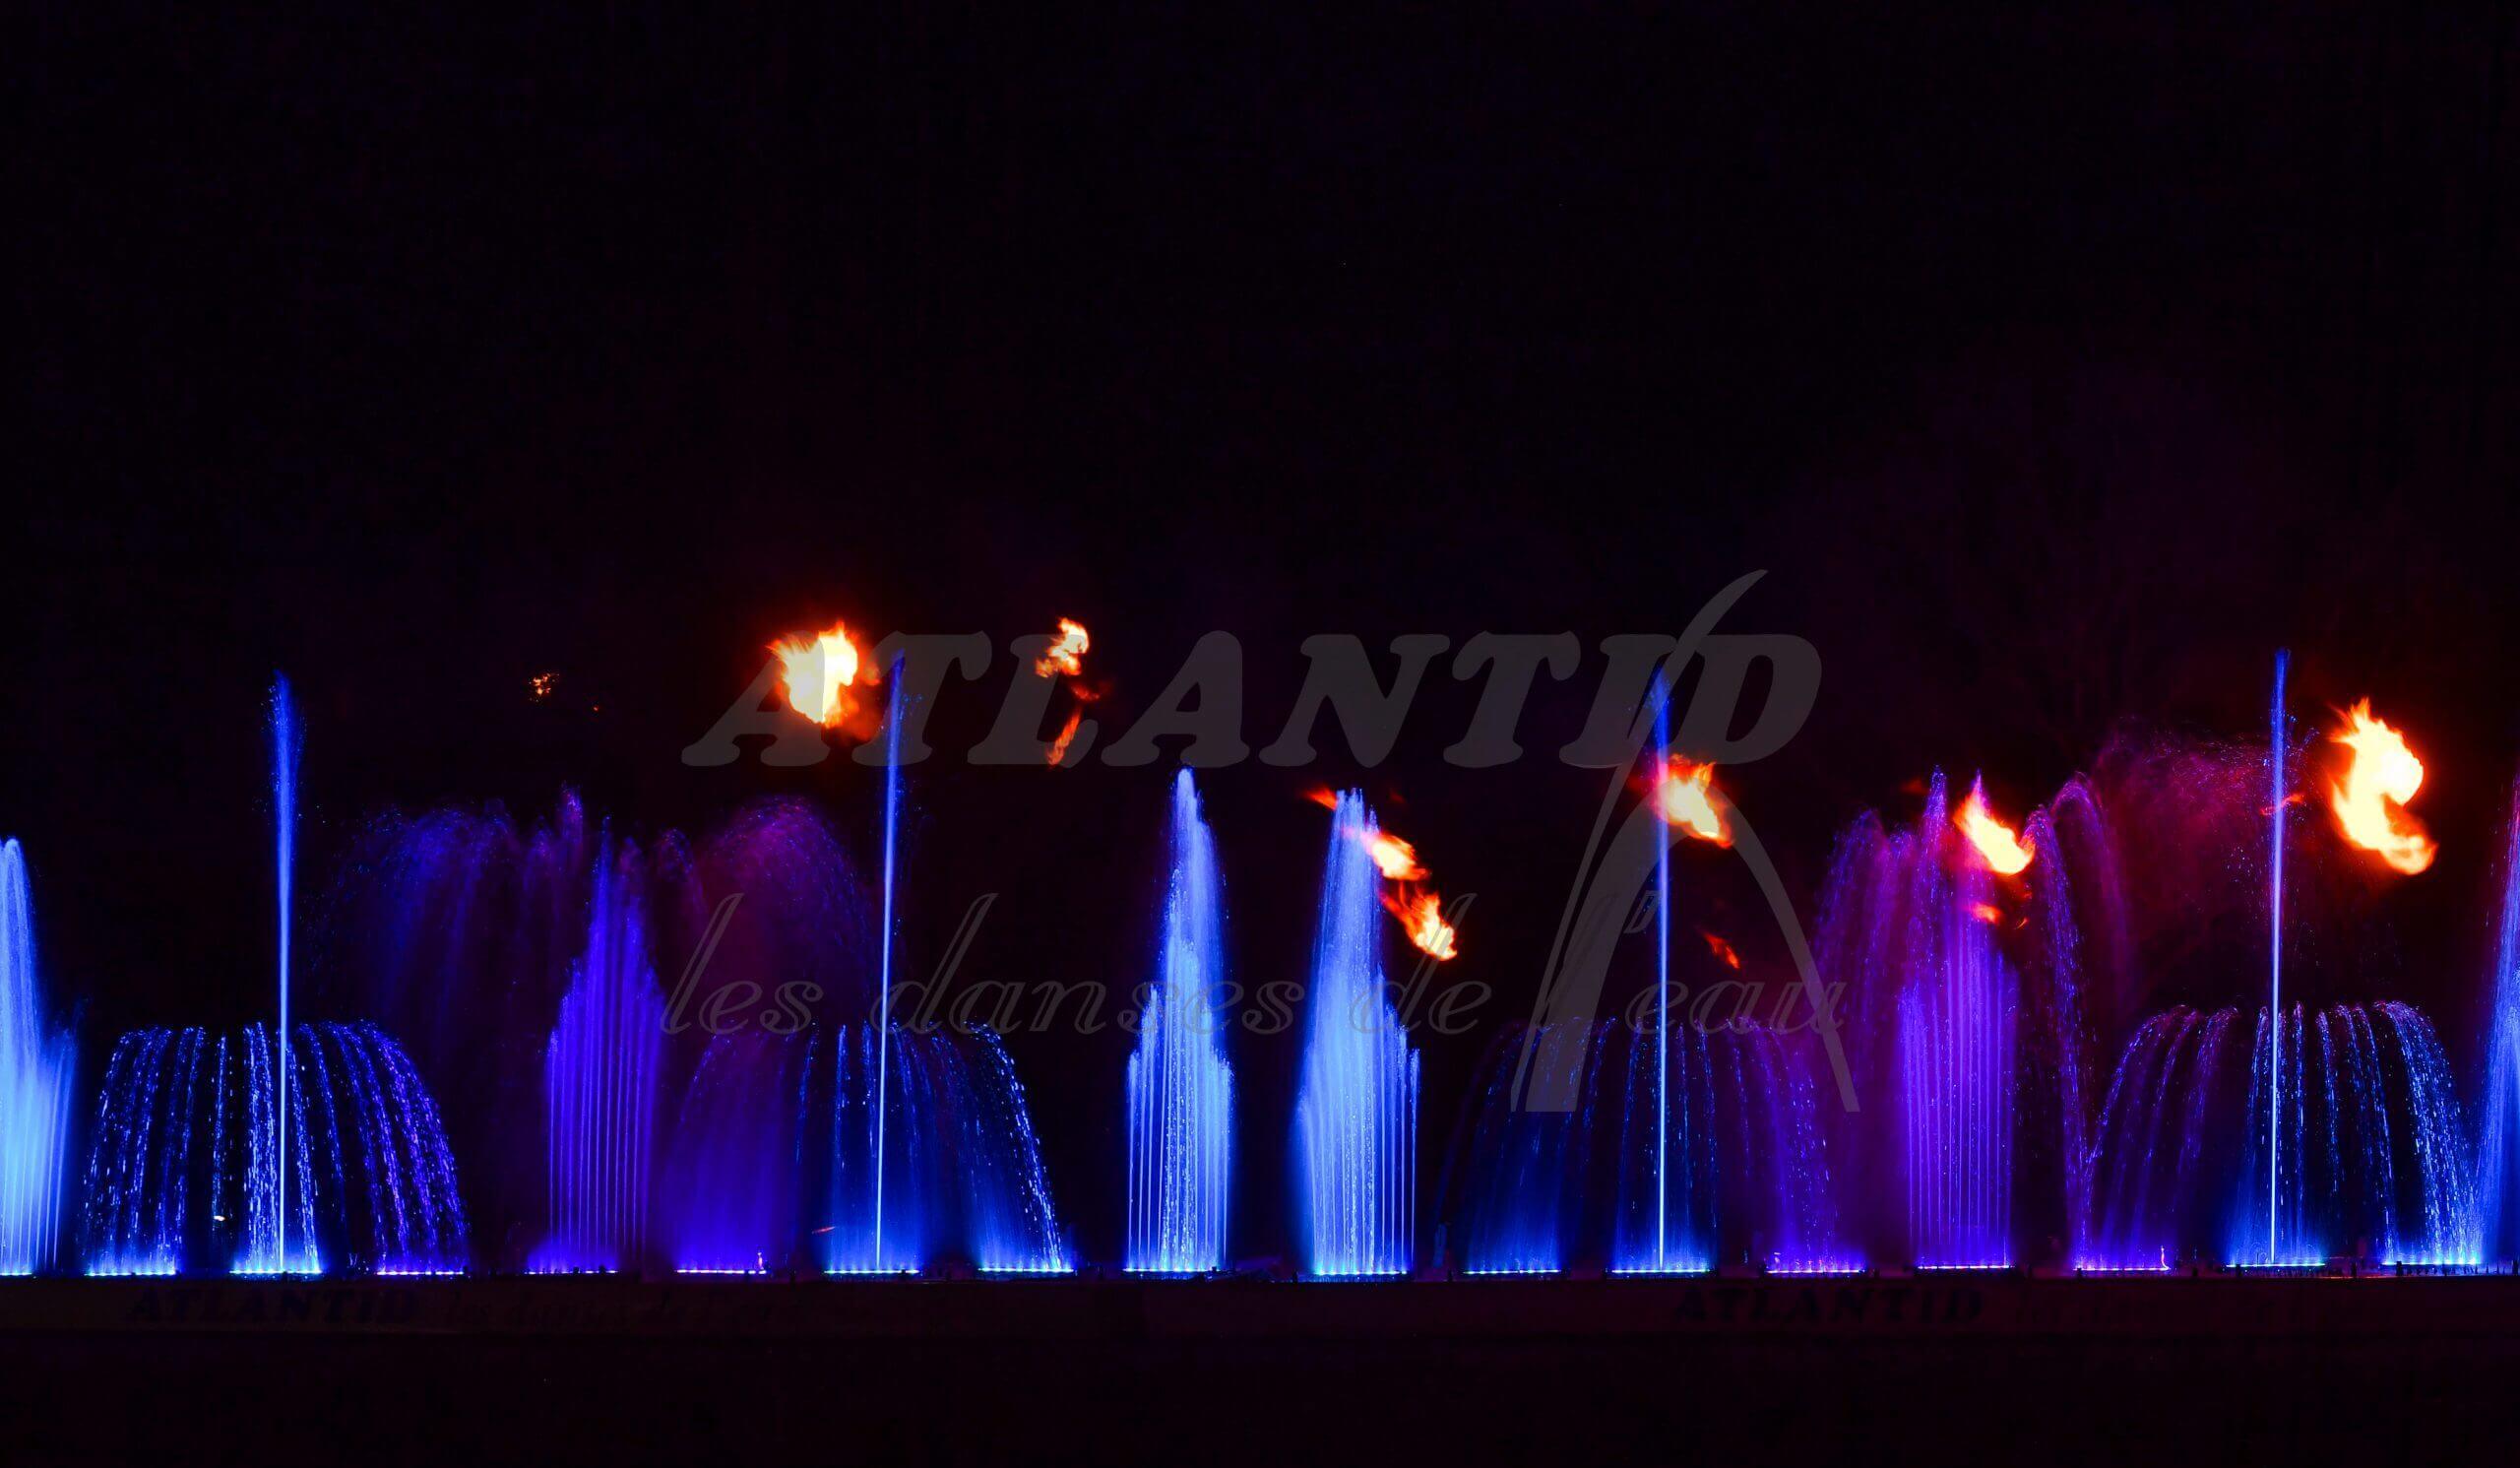 Atlantid - Blue and purple water jets